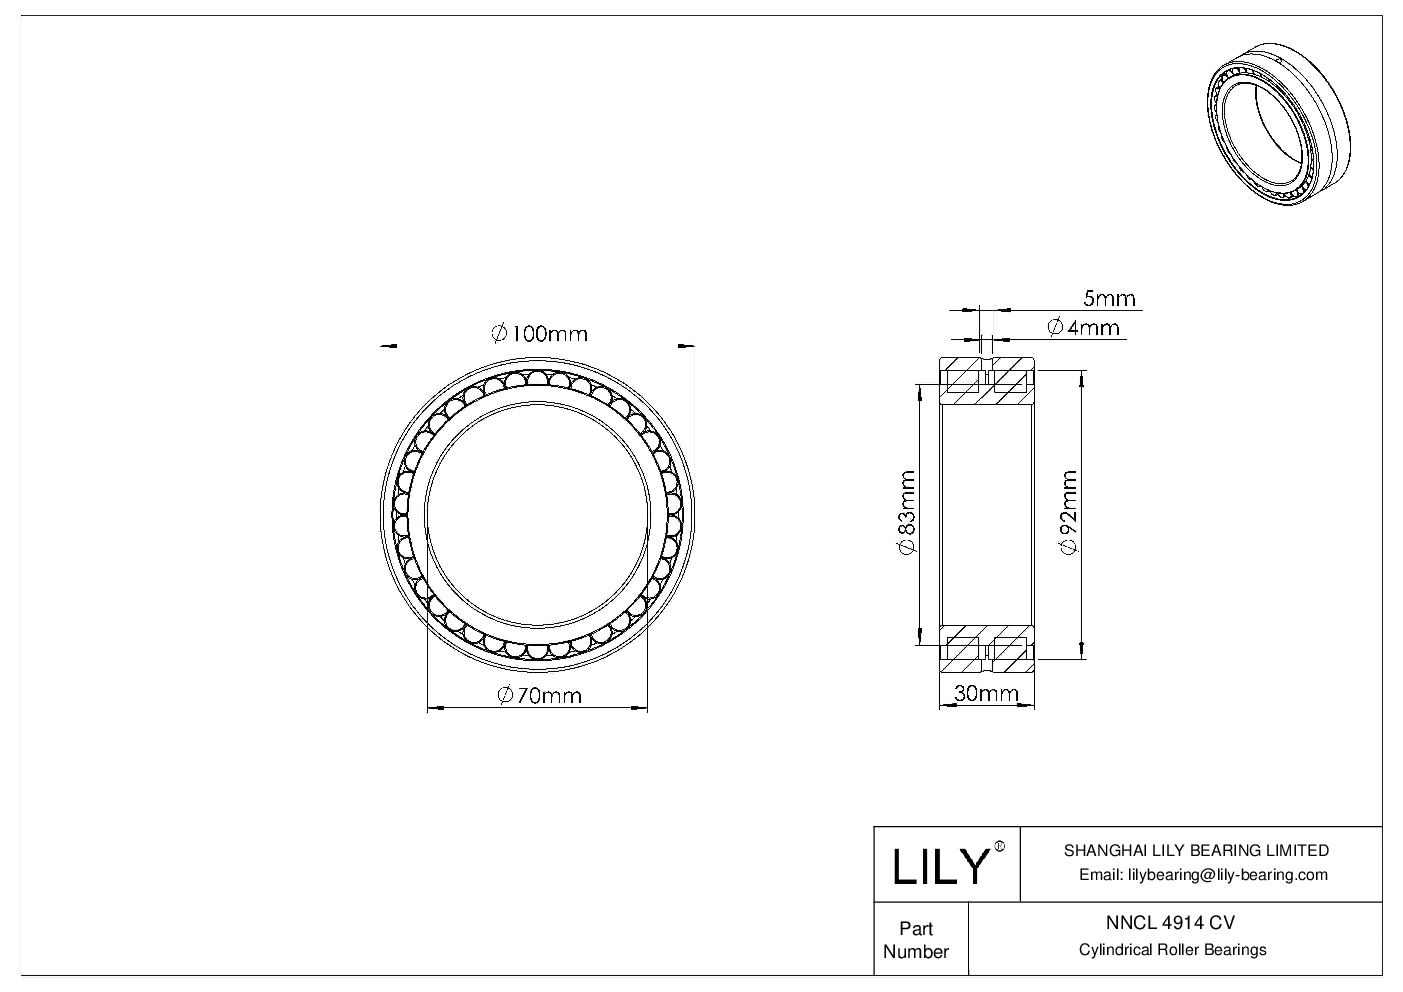 NNCL 4914 CV Double Row Full Complement Cylindrical Roller Bearings cad drawing